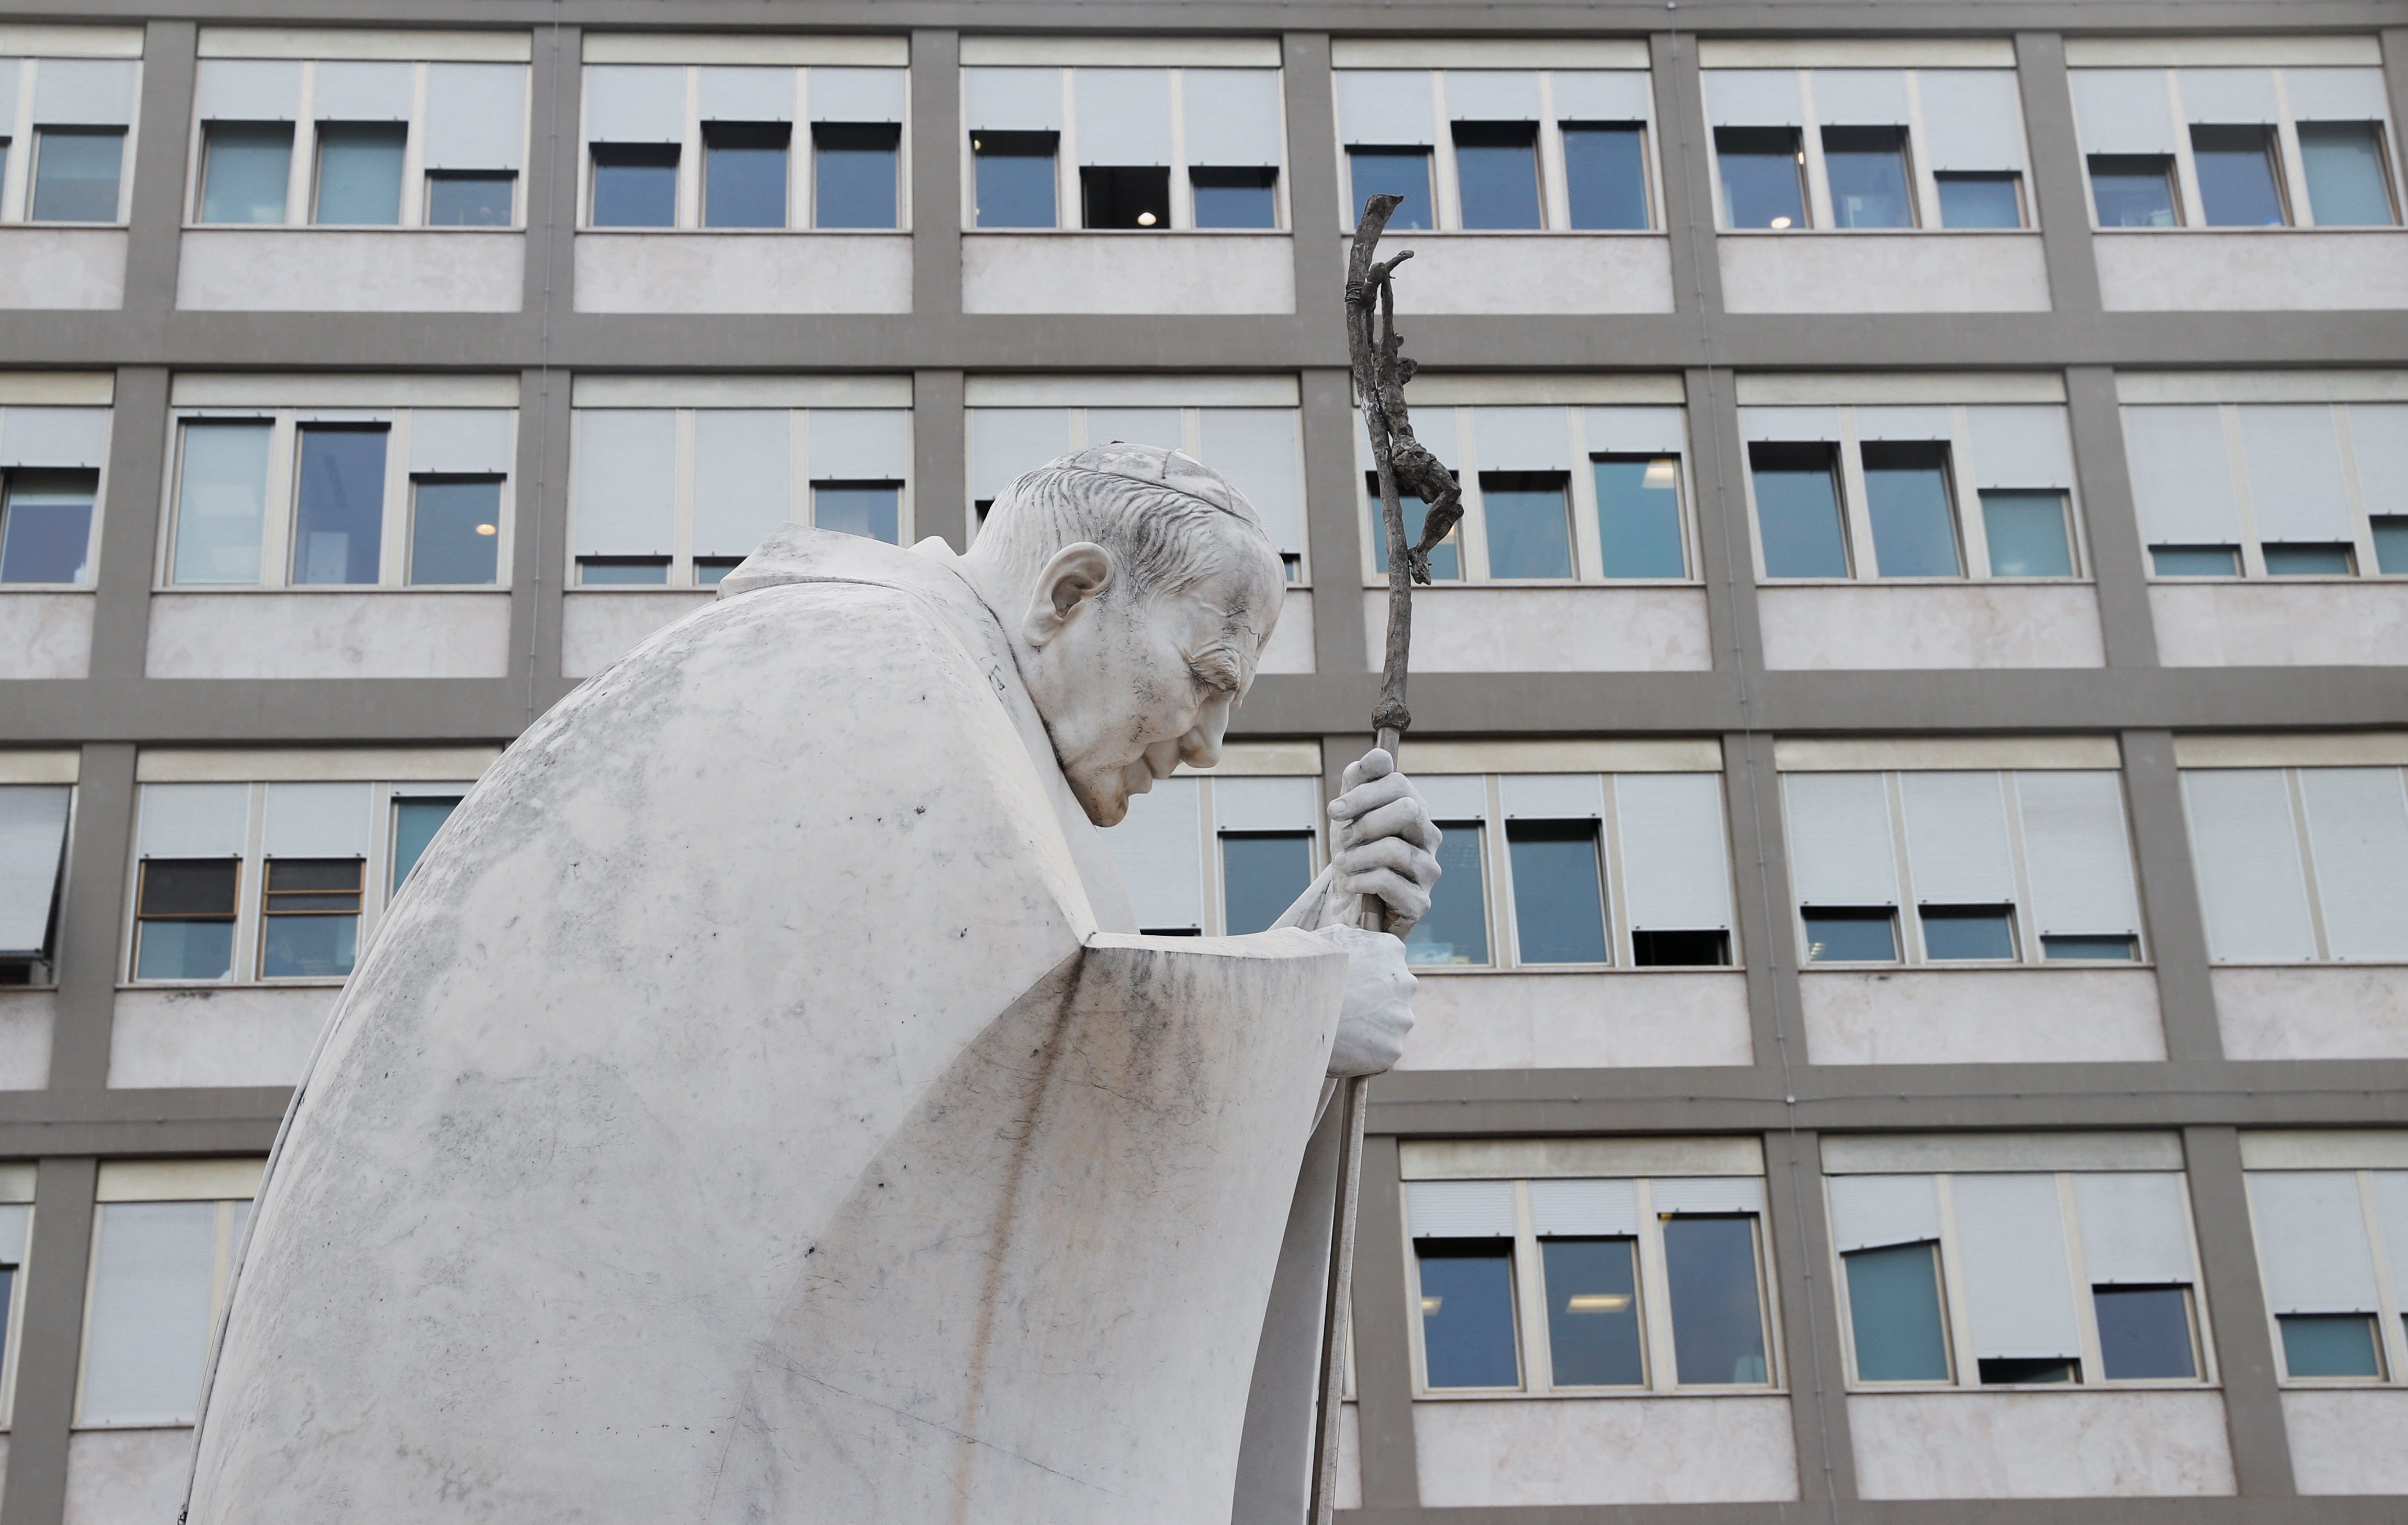 A statue of St. John Paul II is seen in the courtyard of Rome's Gemelli Hospital March 30, 2023, where Pope Francis was admitted March 29 due to concerns over breathing difficulties. He was diagnosed with a "respiratory infection," according to the Vatican. A March 30 update from the Vatican said the pope was "steadily improving" and continuing his planned course of treatment. (OSV News/Reuters/Remo Casilli)